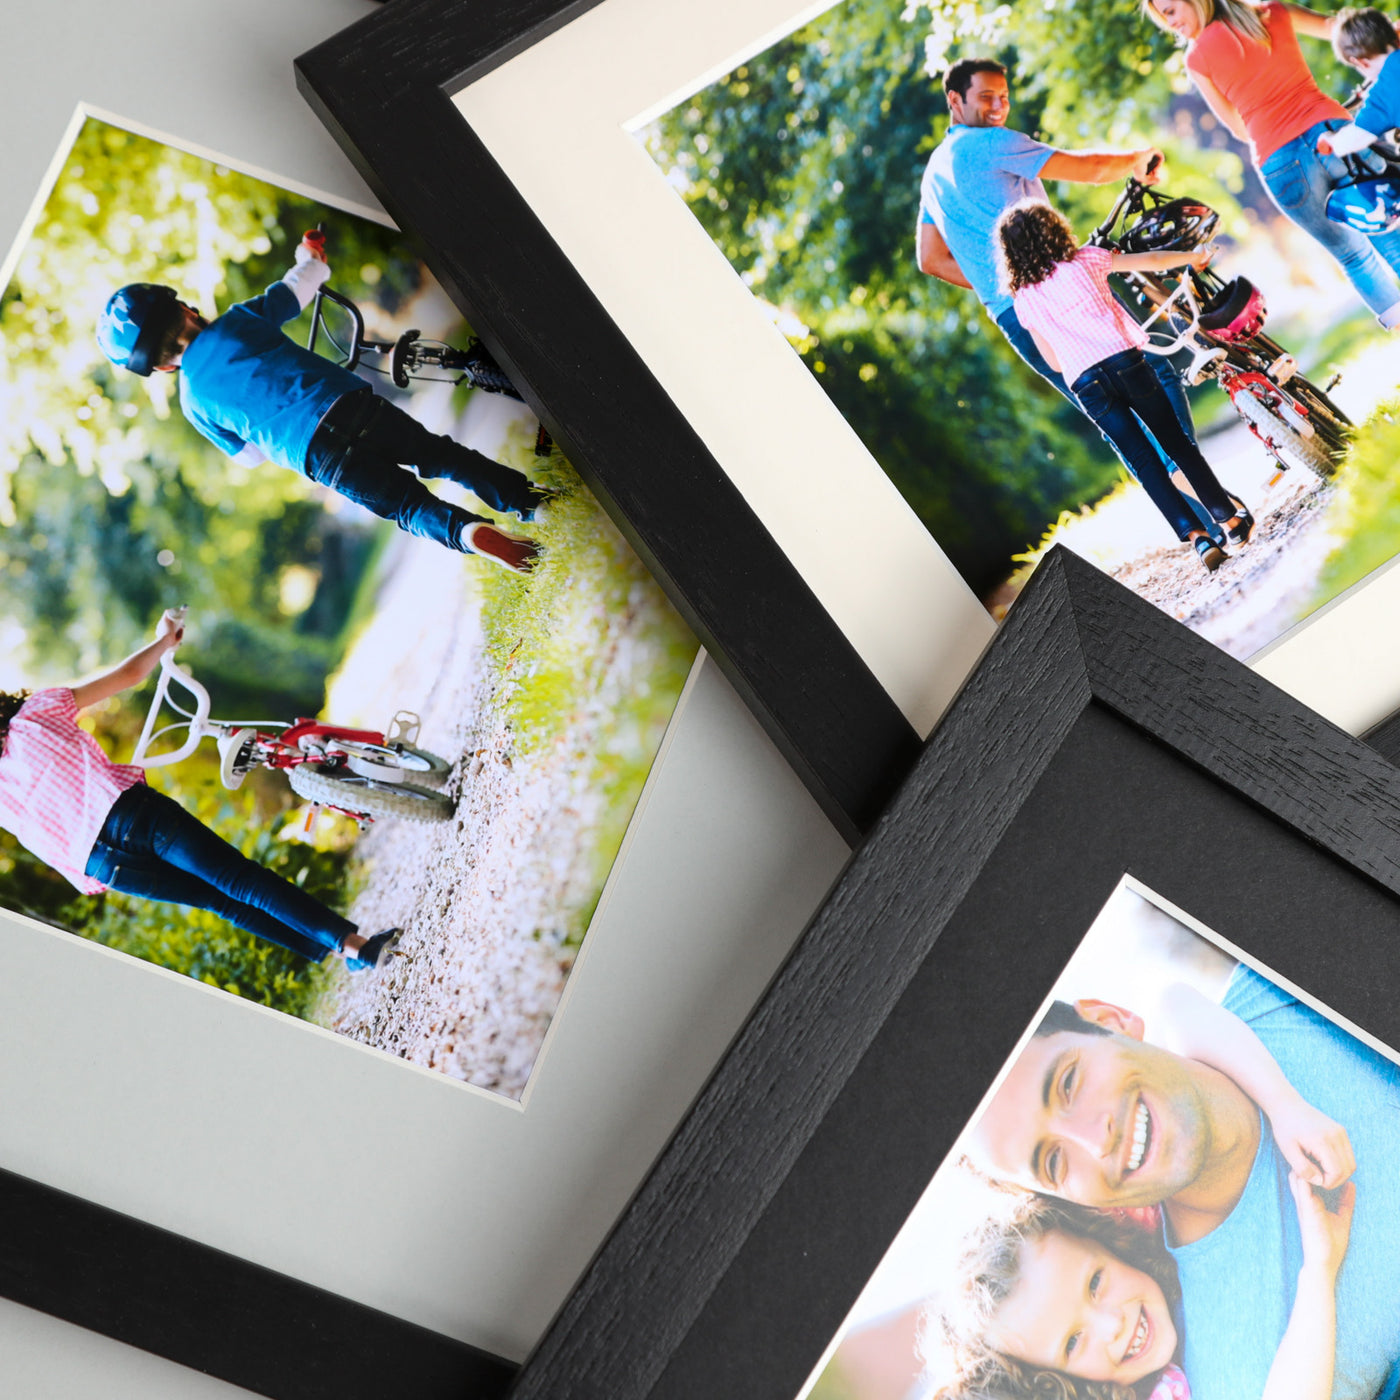 8x8 Classic Black Picture Frame with a 4x4 Mount